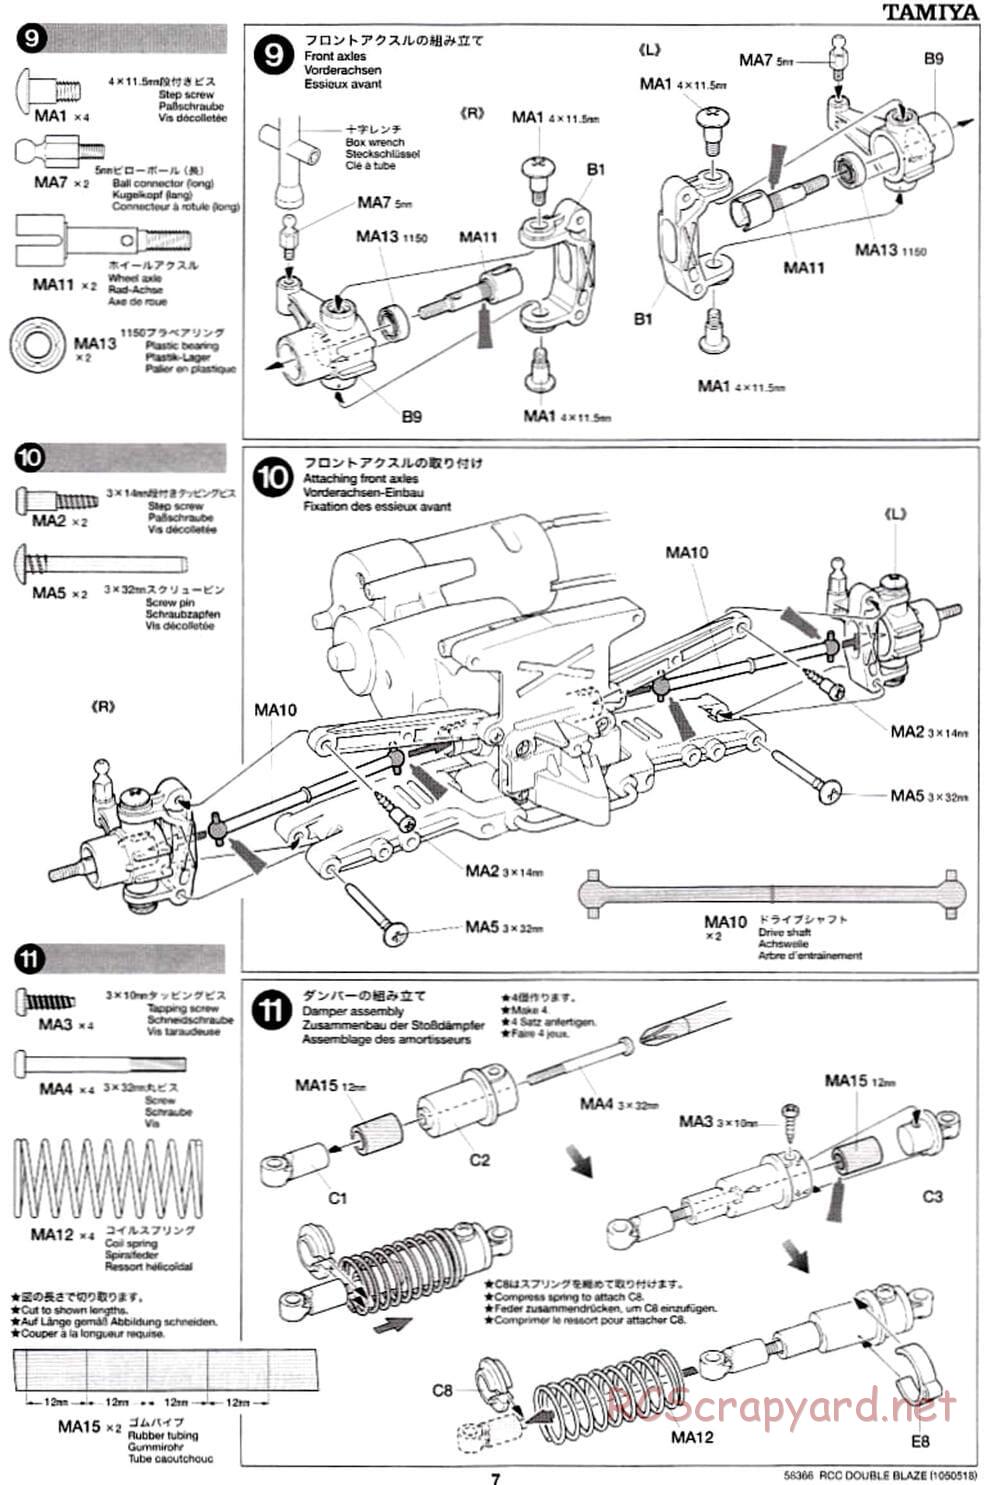 Tamiya - Double Blaze - WR-01 Chassis - Manual - Page 7